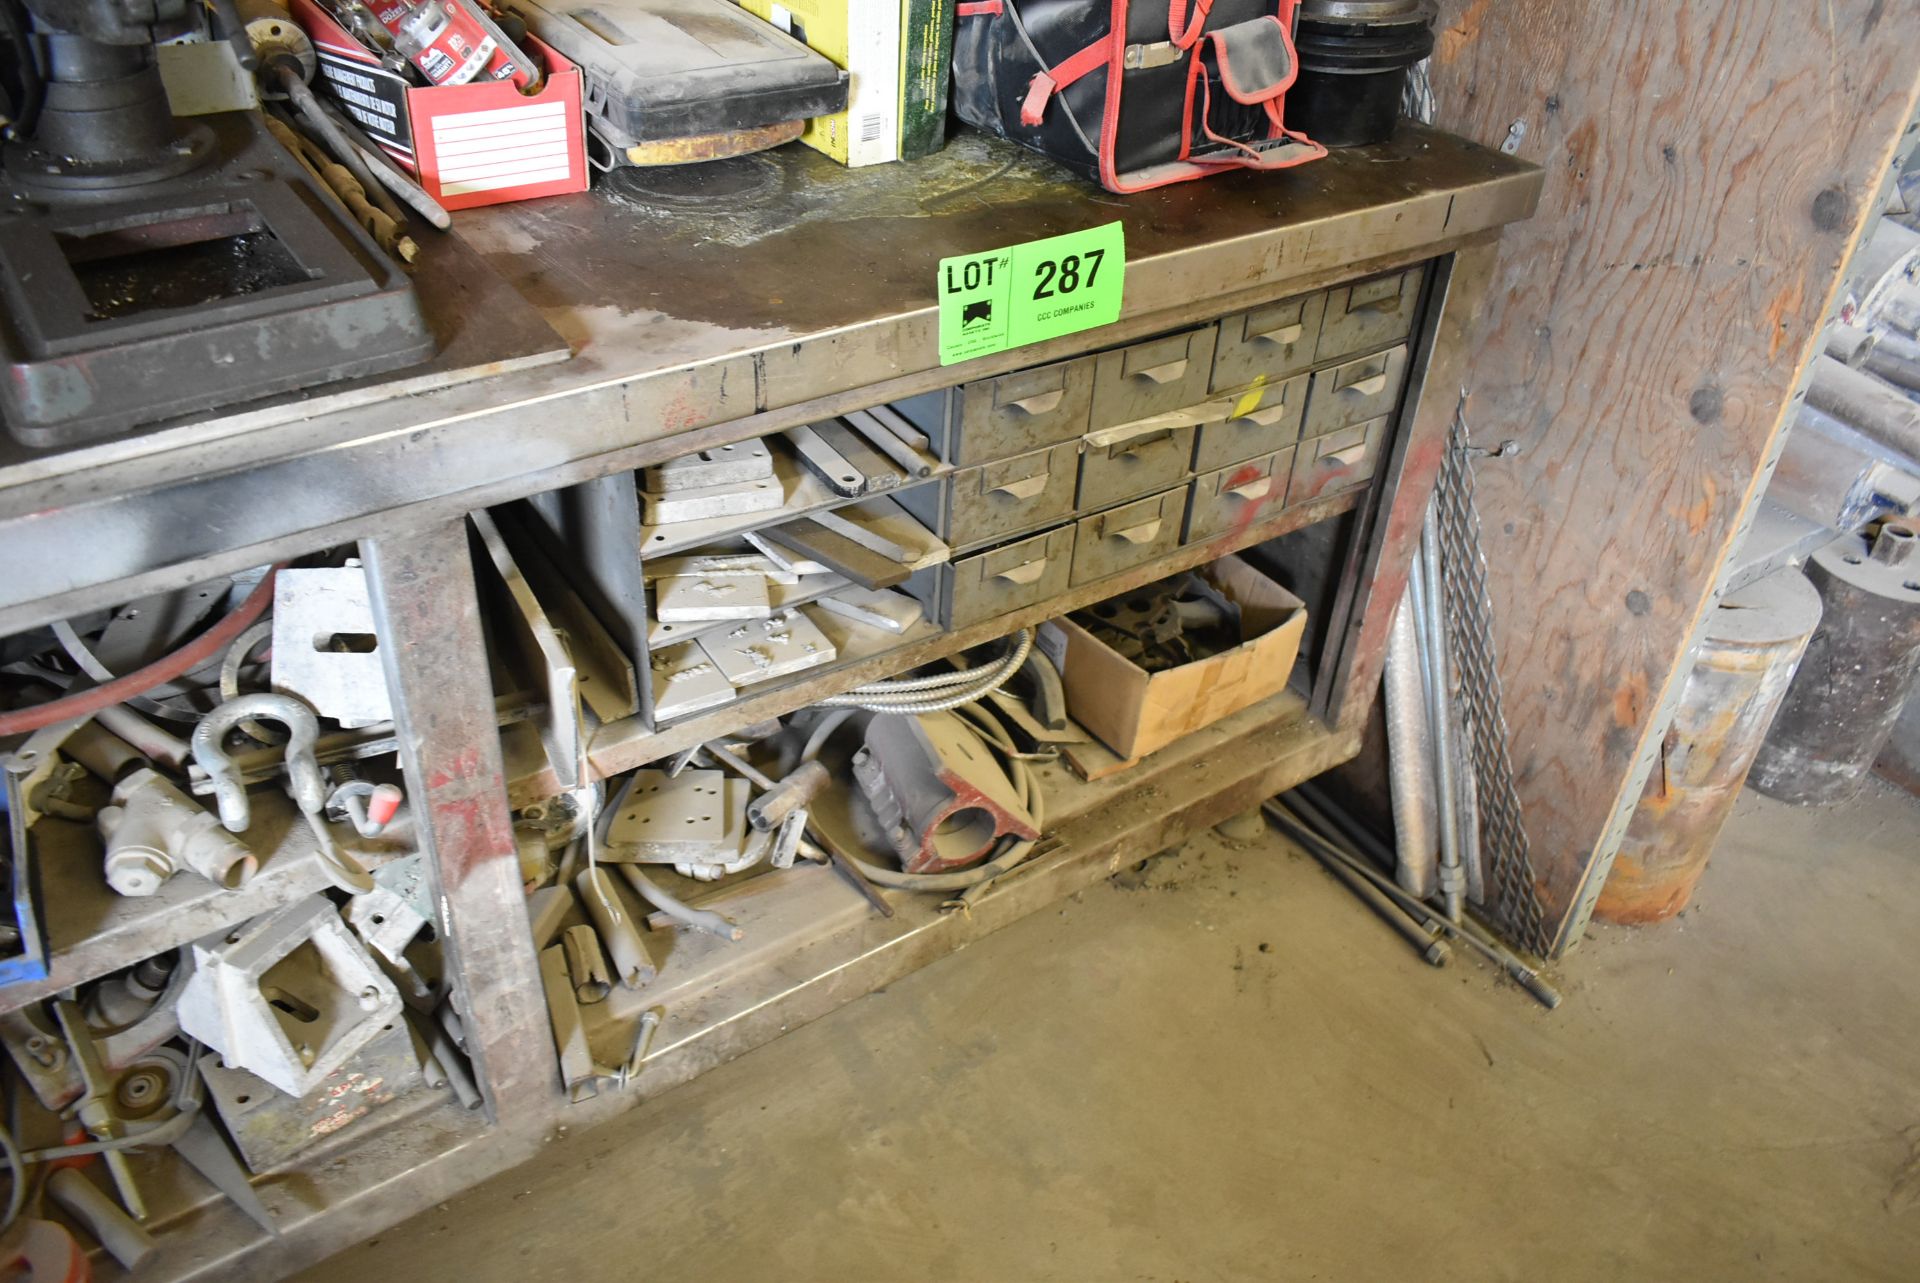 LOT/ SHOP BENCH WITH CONTENTS CONSISTING OF HAND TOOLS, HARDWARE & SUPPLIES - Image 4 of 4